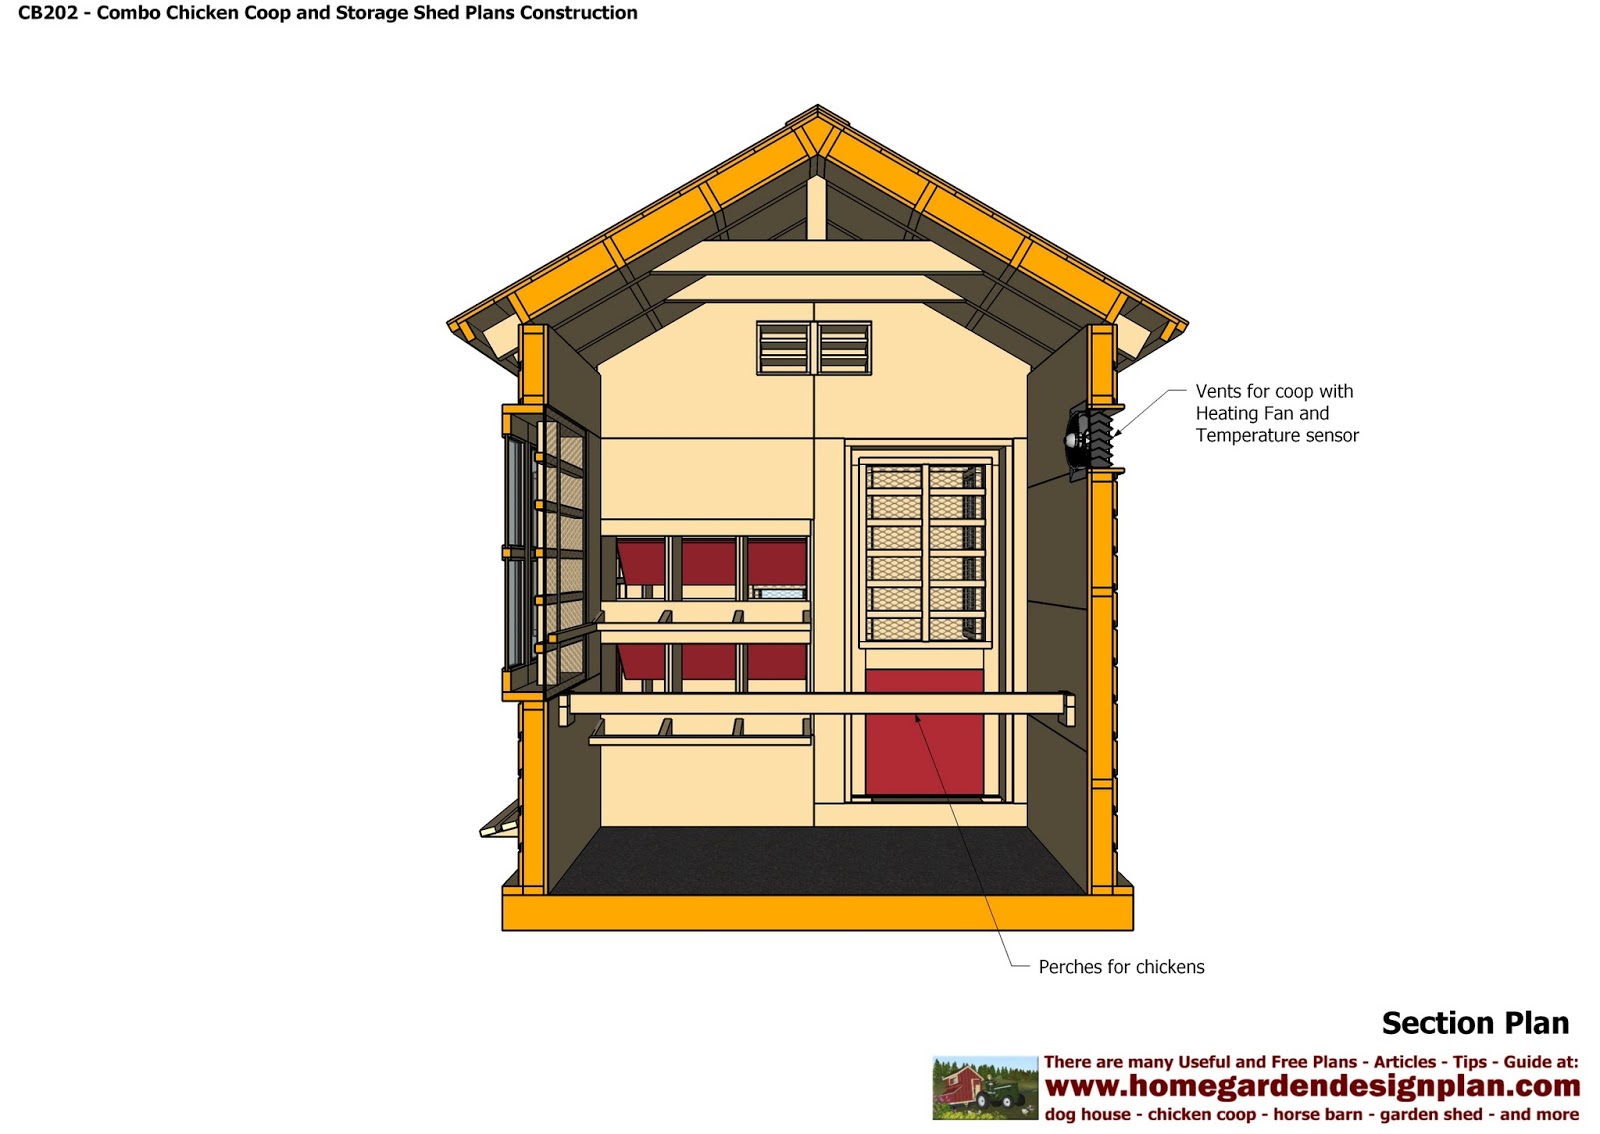 Shed Plans Building: CB202 Combo Plans Chicken Coop Plans Construction 